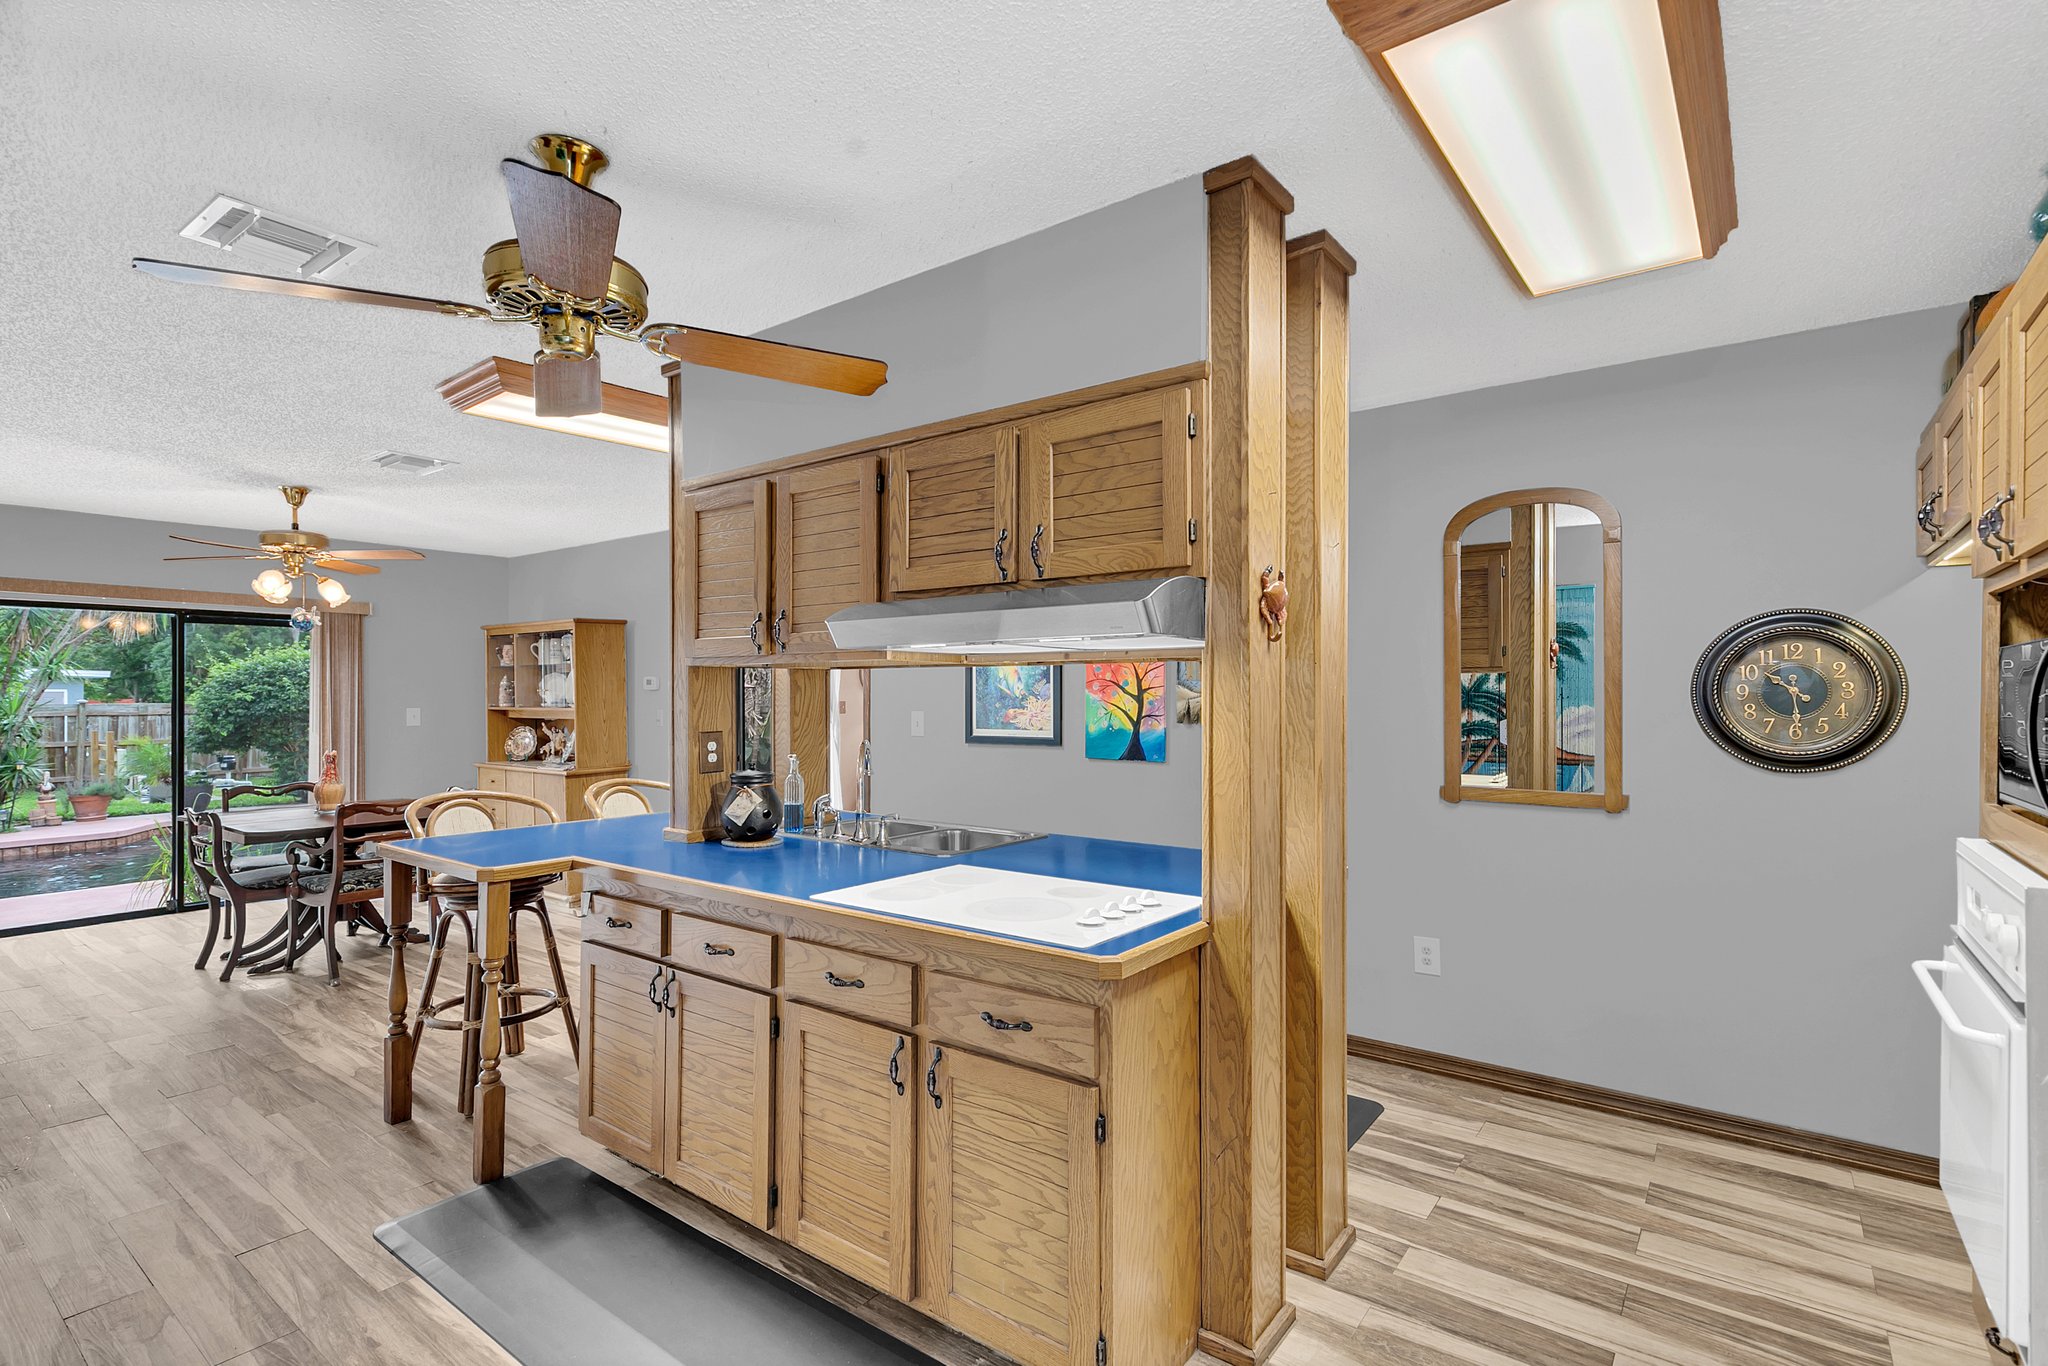 Bright Open Kitchen and dining space. EZ care tile flooring & stellar pool views!